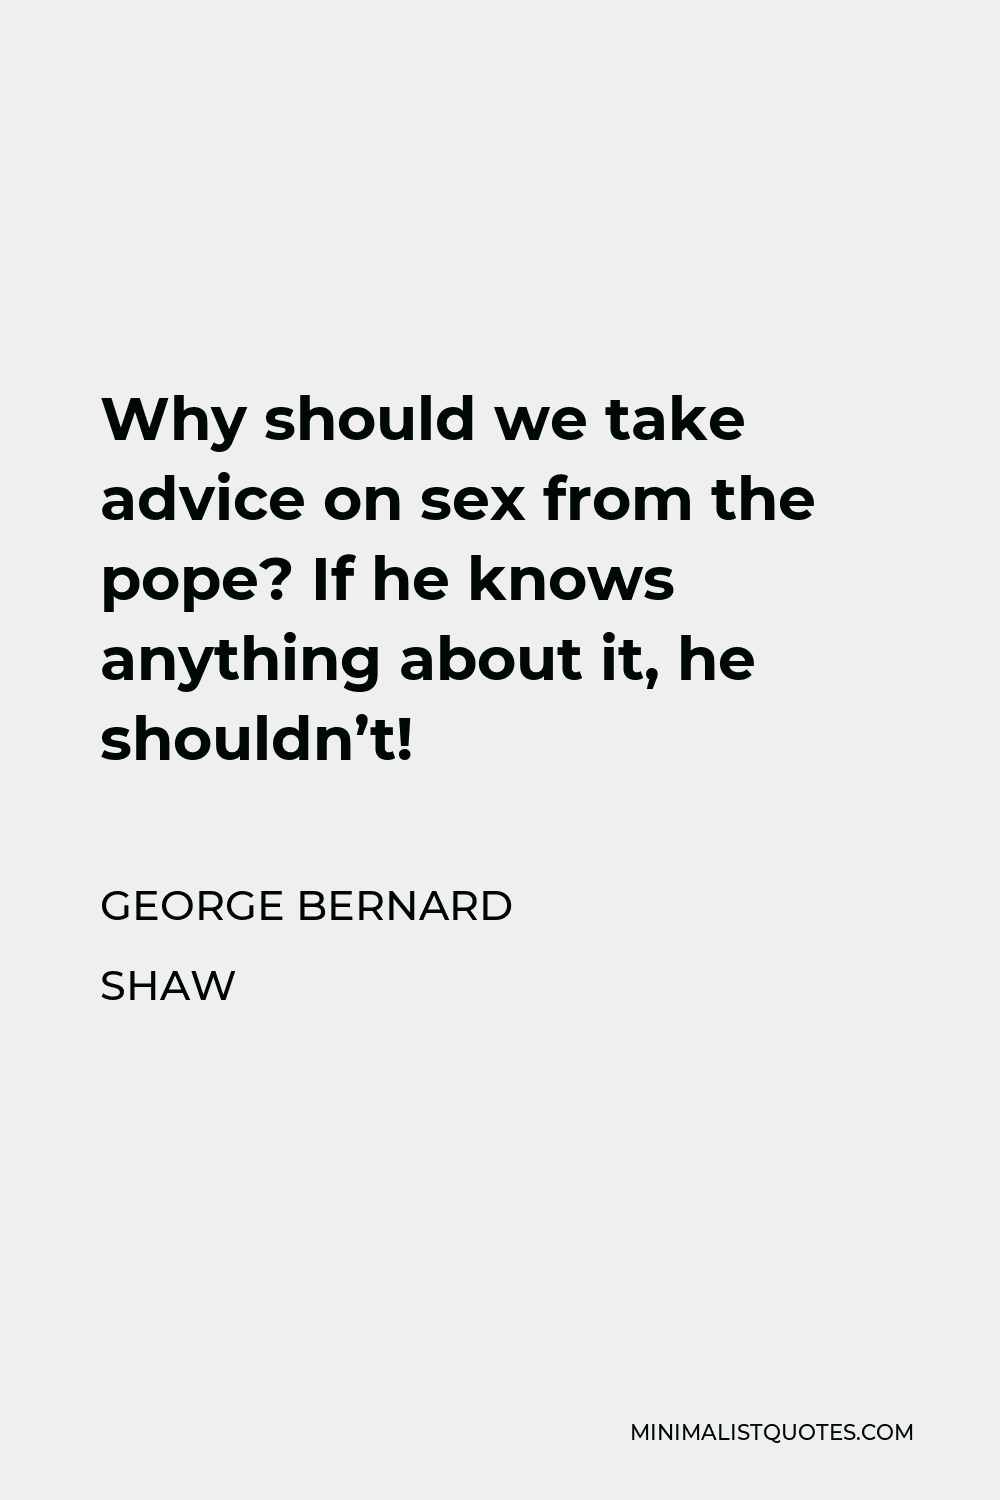 George Bernard Shaw Quote - Why should we take advice on sex from the pope? If he knows anything about it, he shouldn’t!